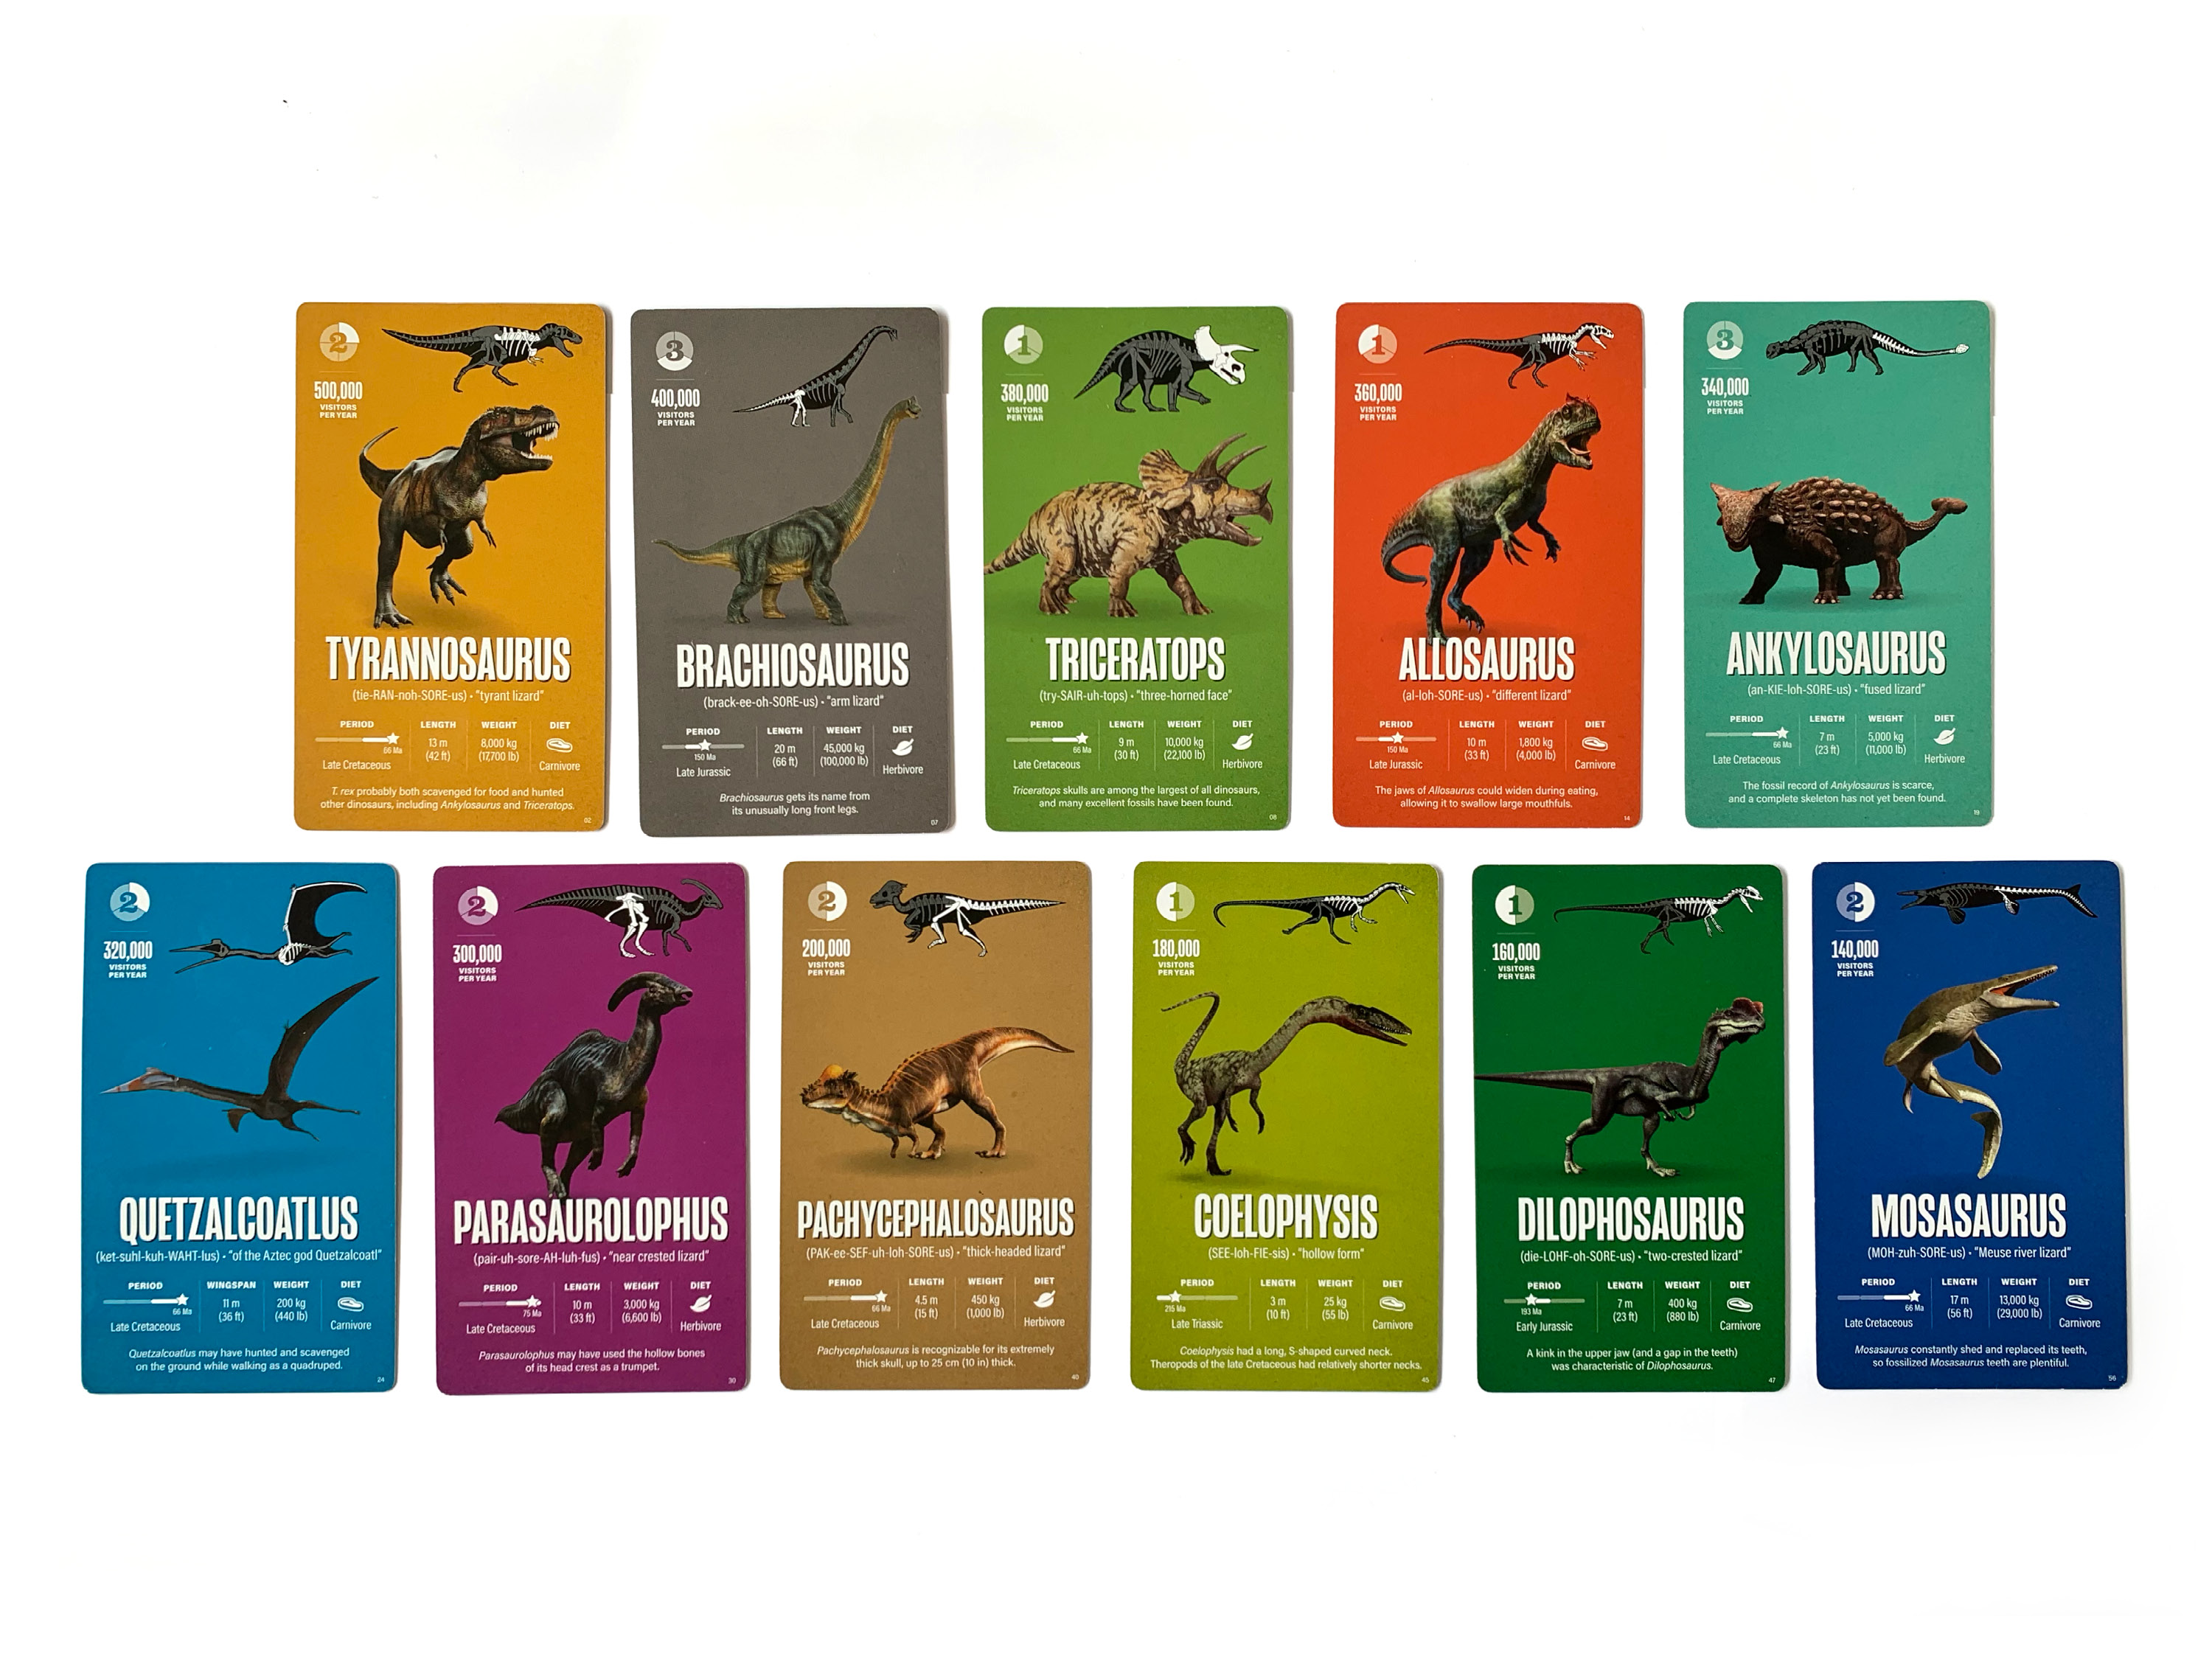 The game's cards are filled with information about dinosaurs, including pronunciations and when the creatures roamed the planet.